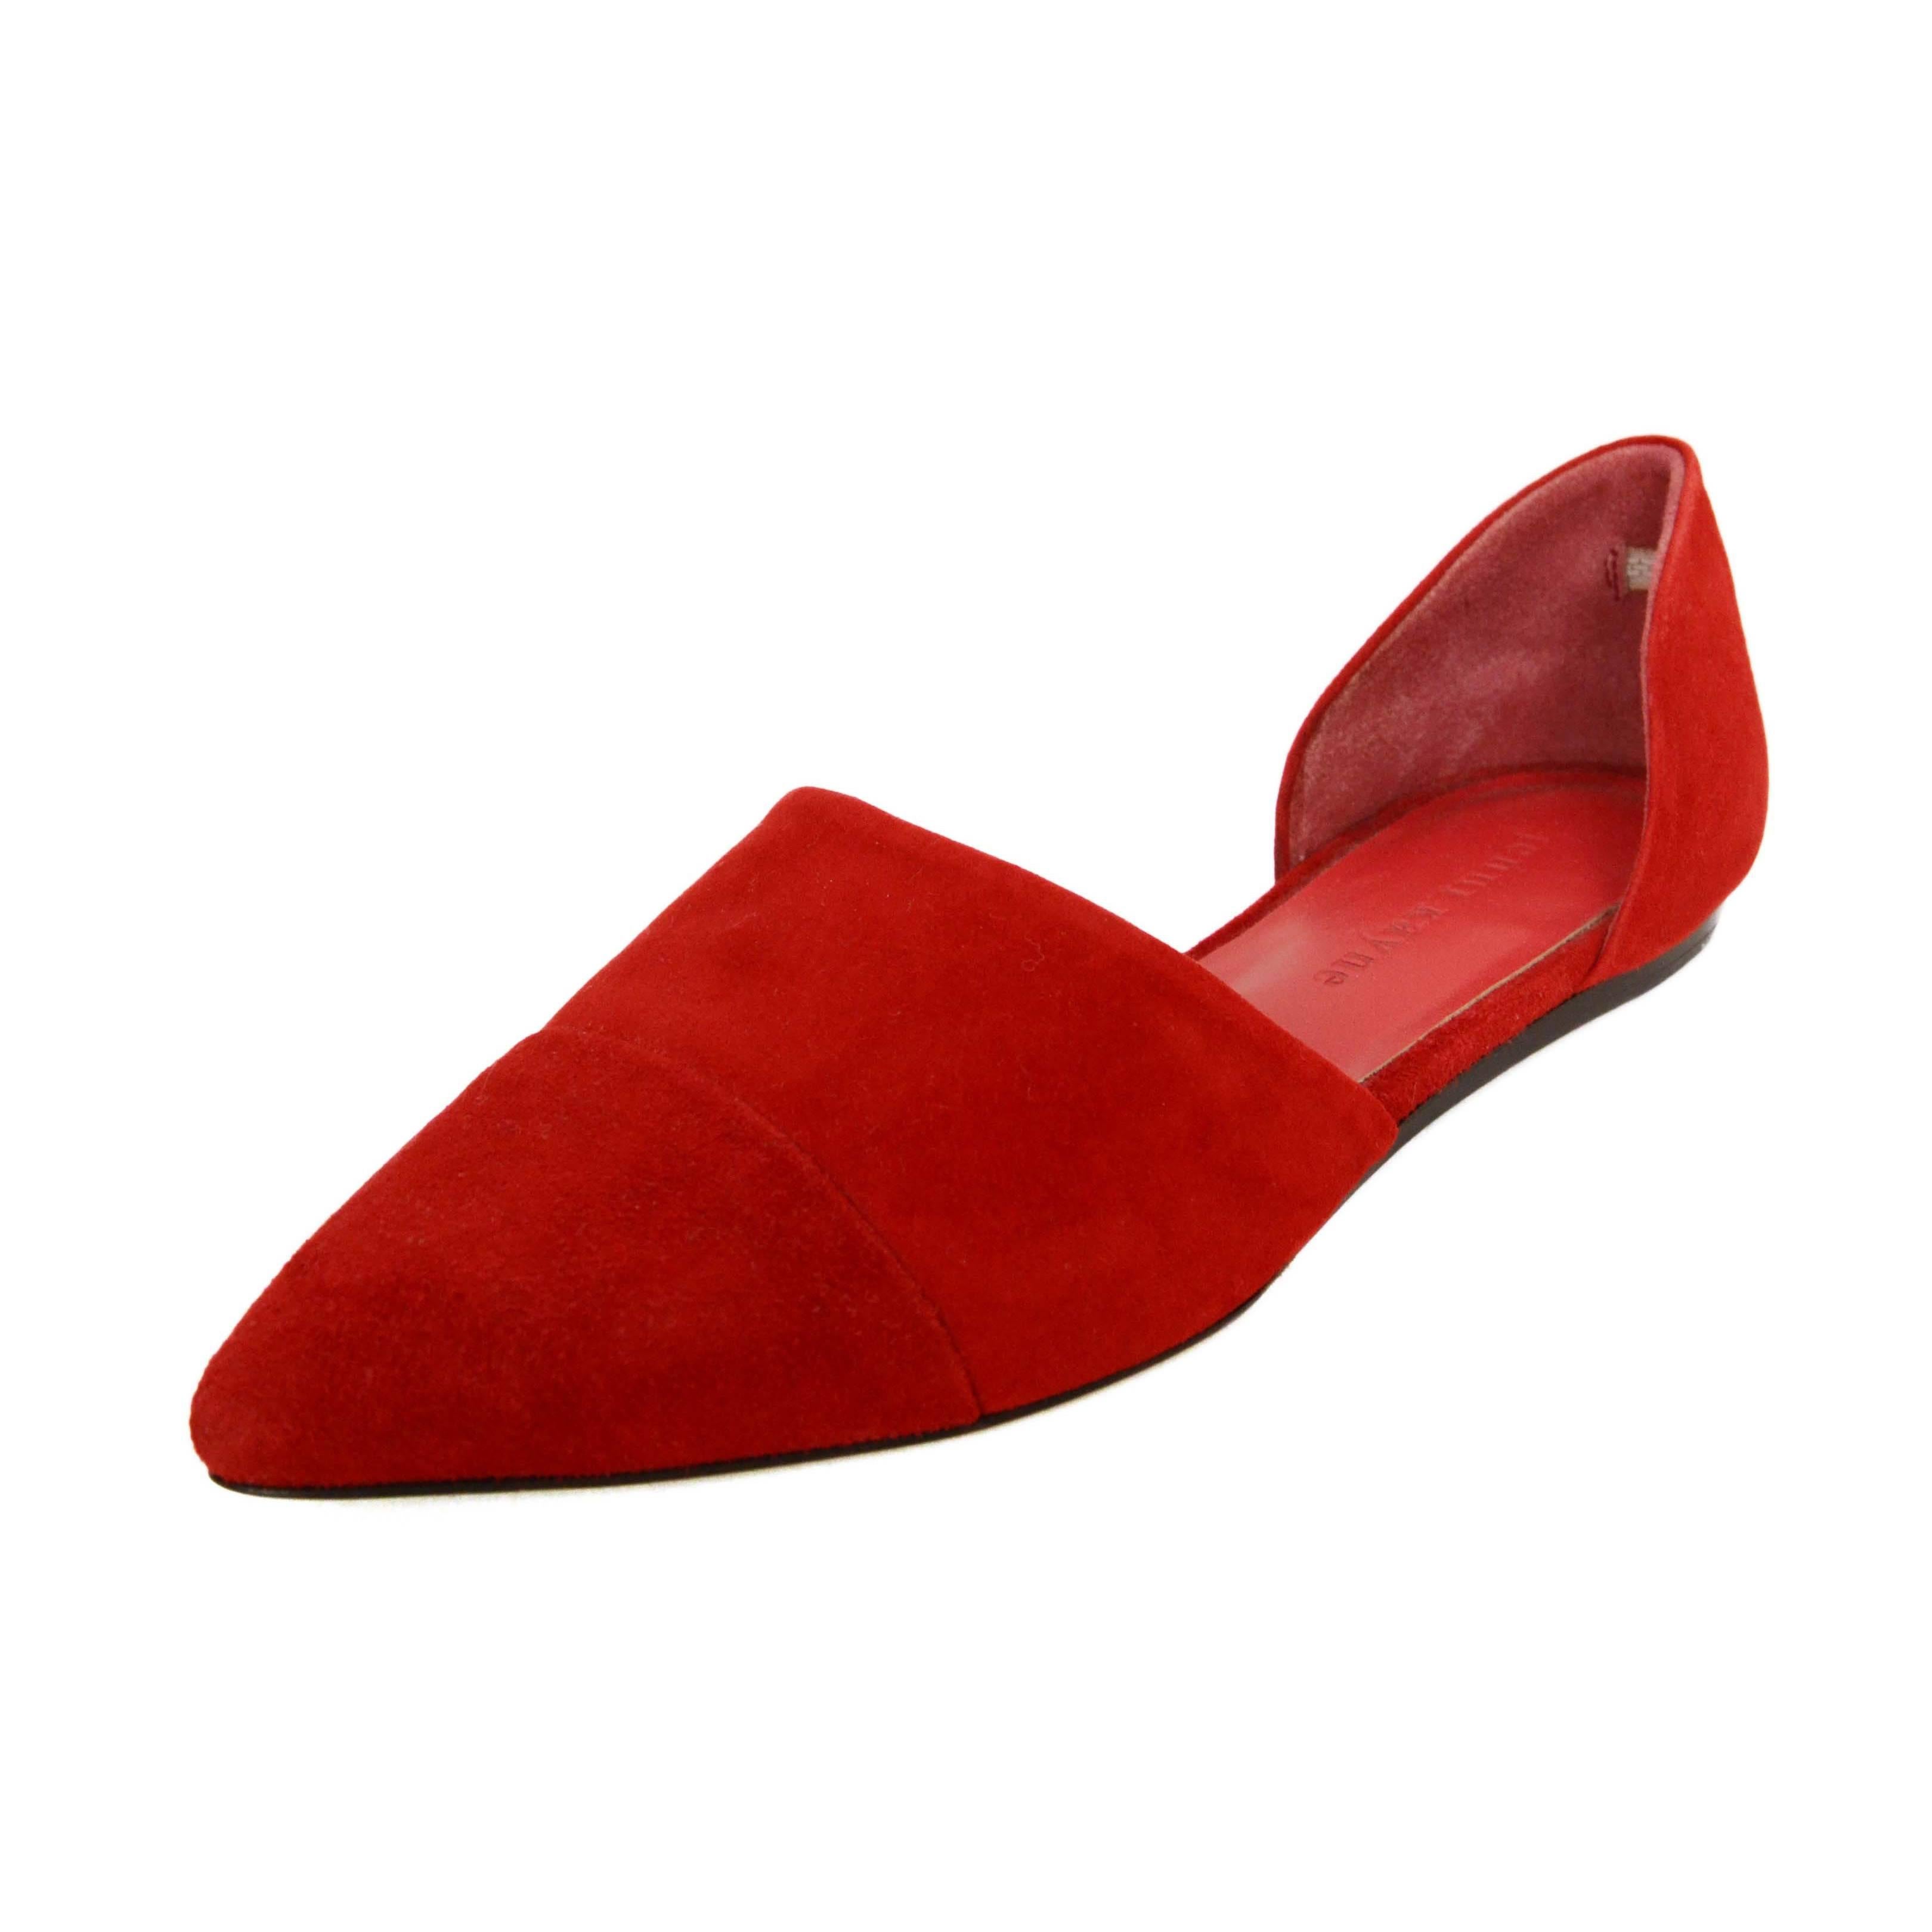 Jenni Kayne Red Suede D'Orsay Flats sz 37